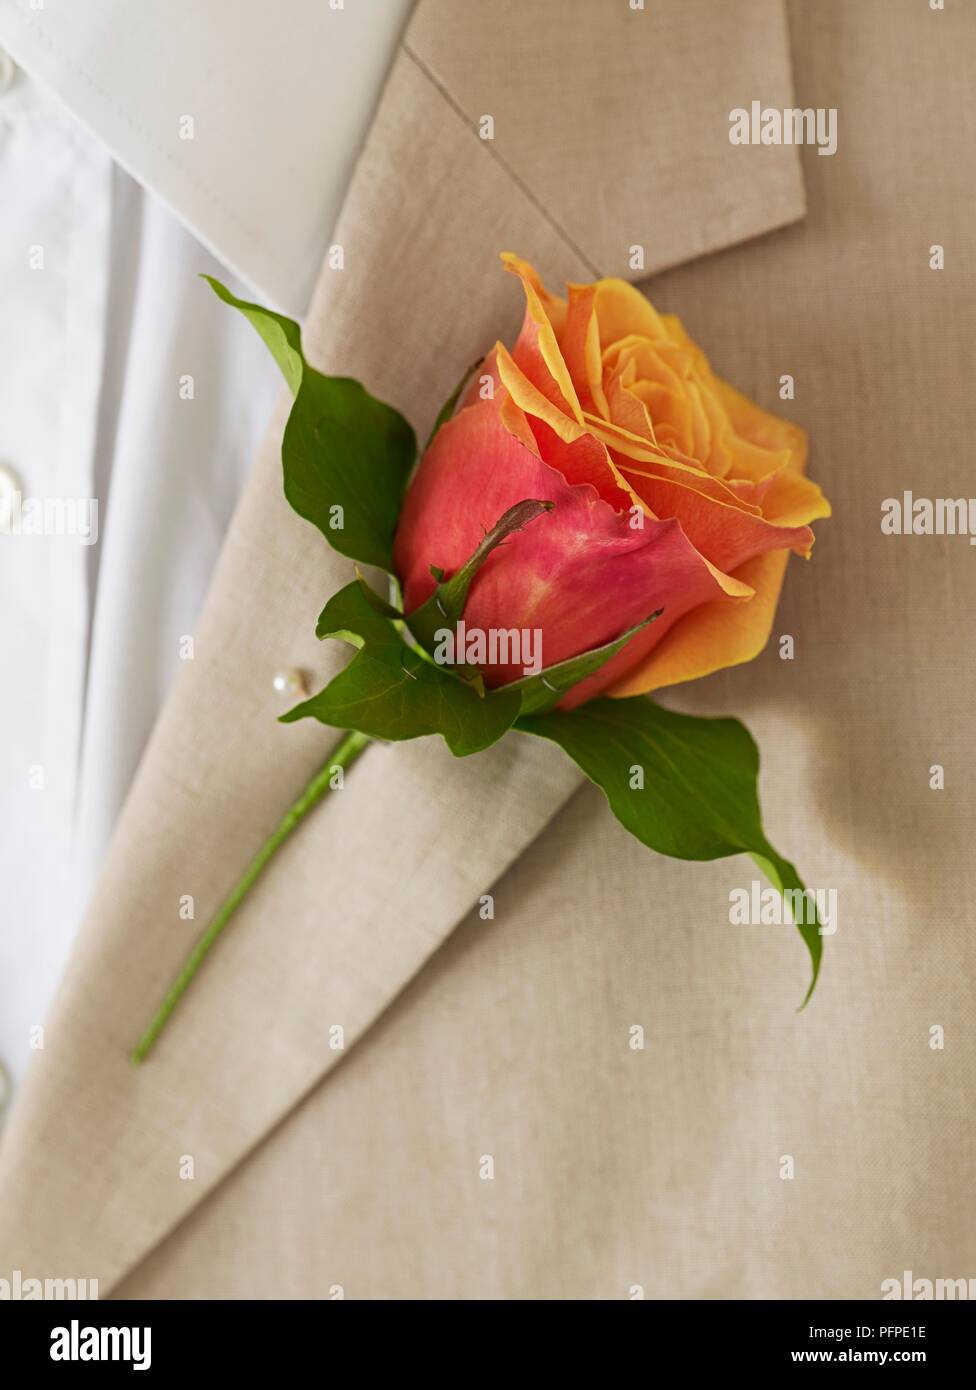 Rose in lapel attached with pin, close-up Stock Photo